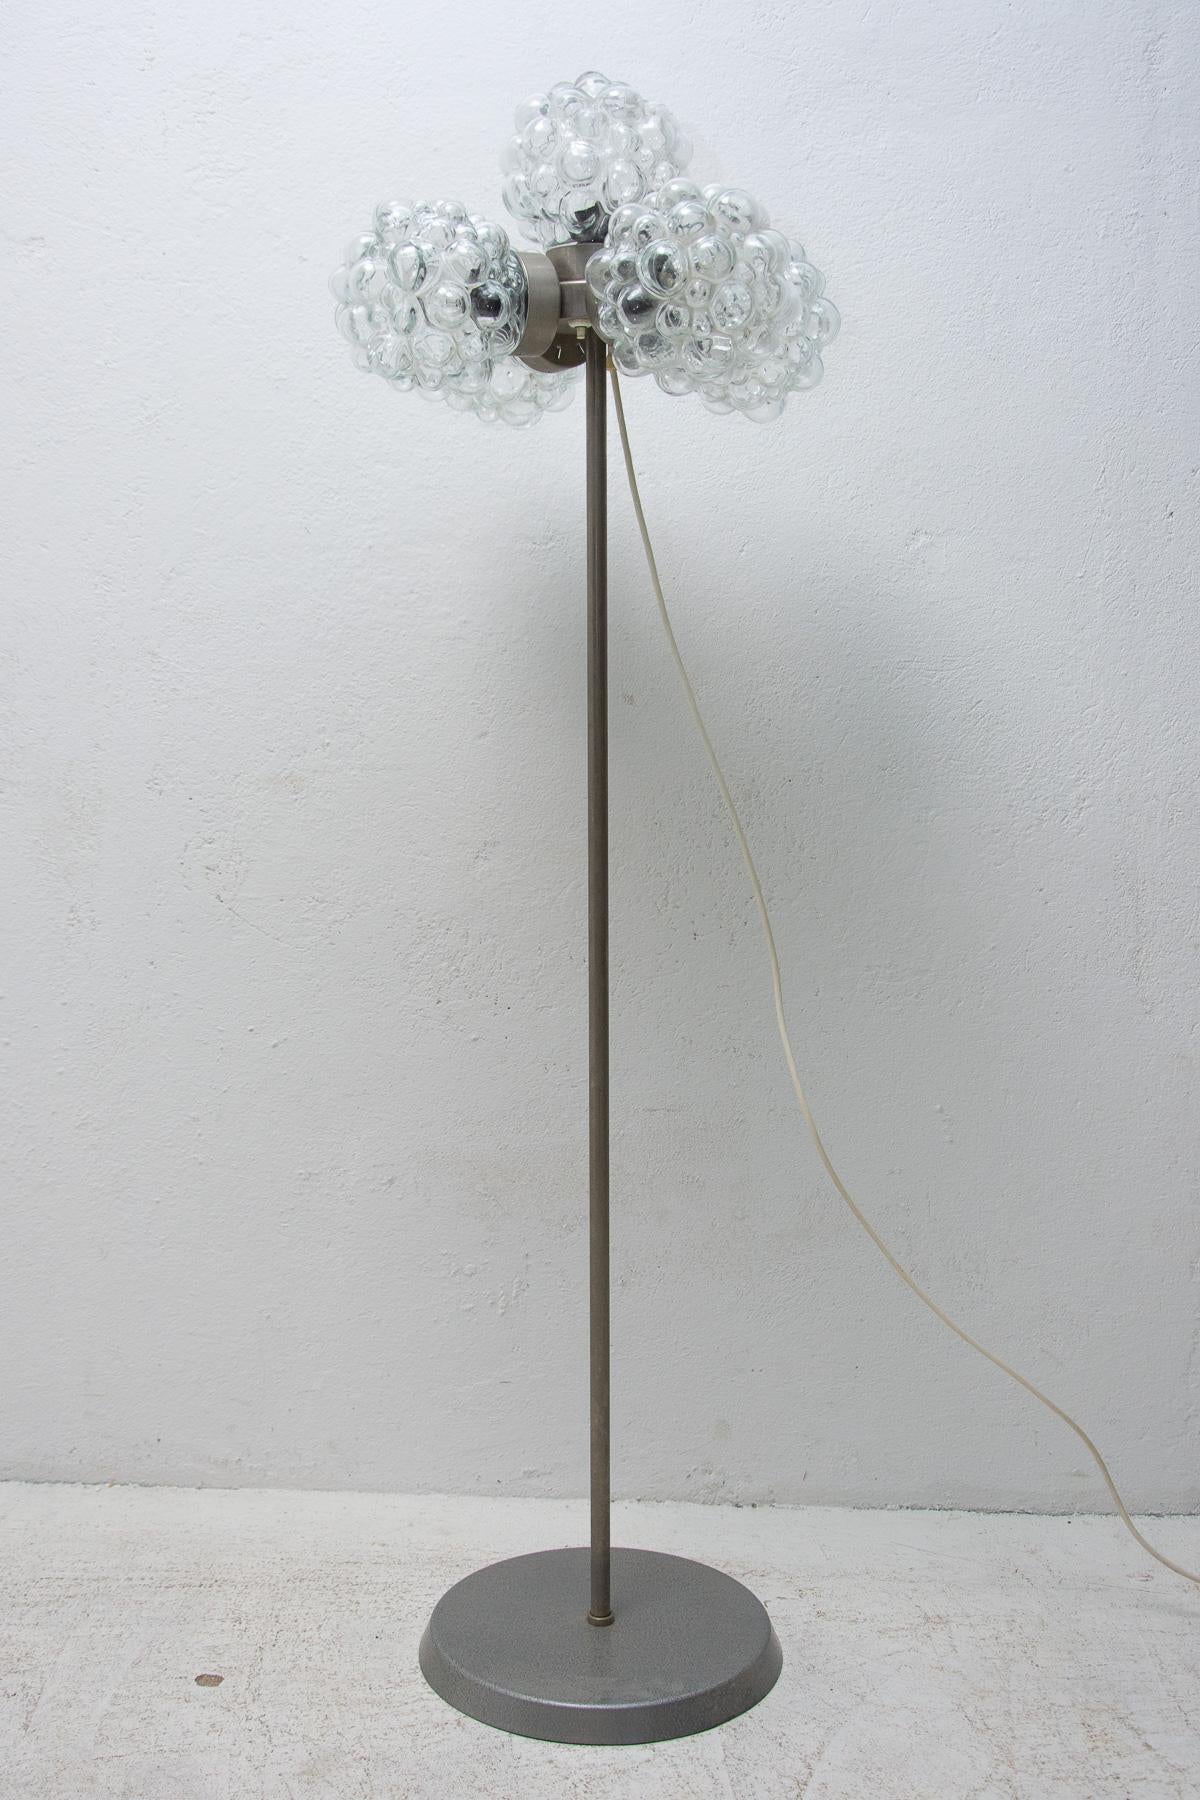 Mid century vintage metal floor lamp, it was made by Kamenický Šenov company in the former Czechoslovakia in the 1970´s. The lamp features the slender leg, metal construction and three glass shades. This lamp is fitted with three E27 bulbs and has